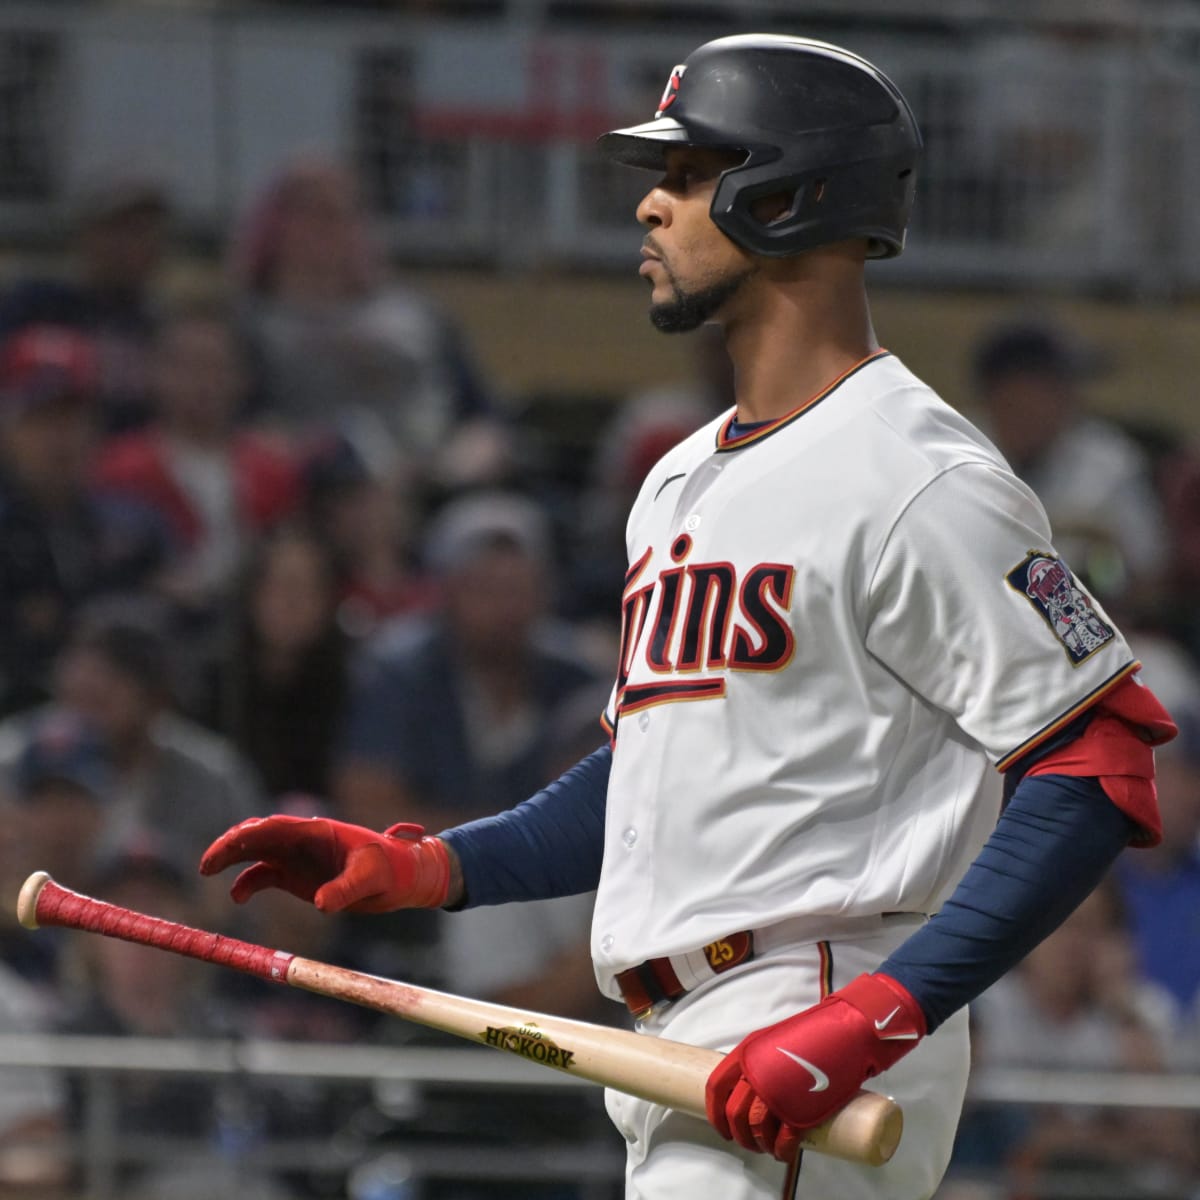 Could this be the MN Twins' Opening Day lineup?